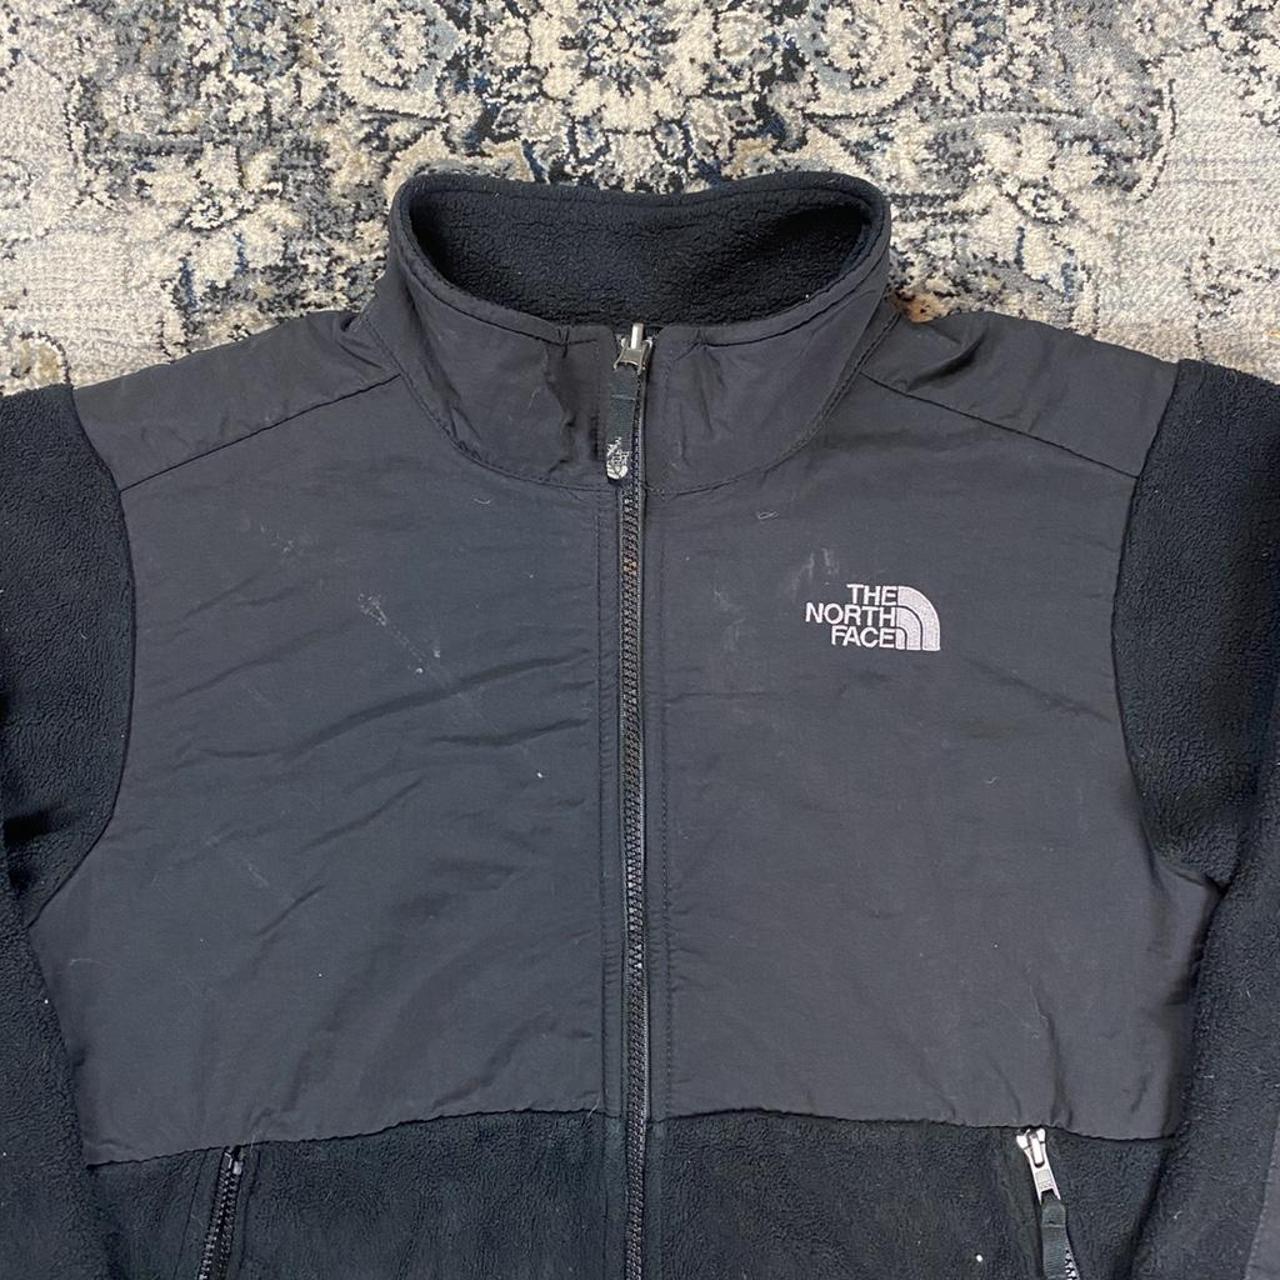 THE NORTH FACE TECH JACKET DETAILS TAG SIZE: BOYS... - Depop